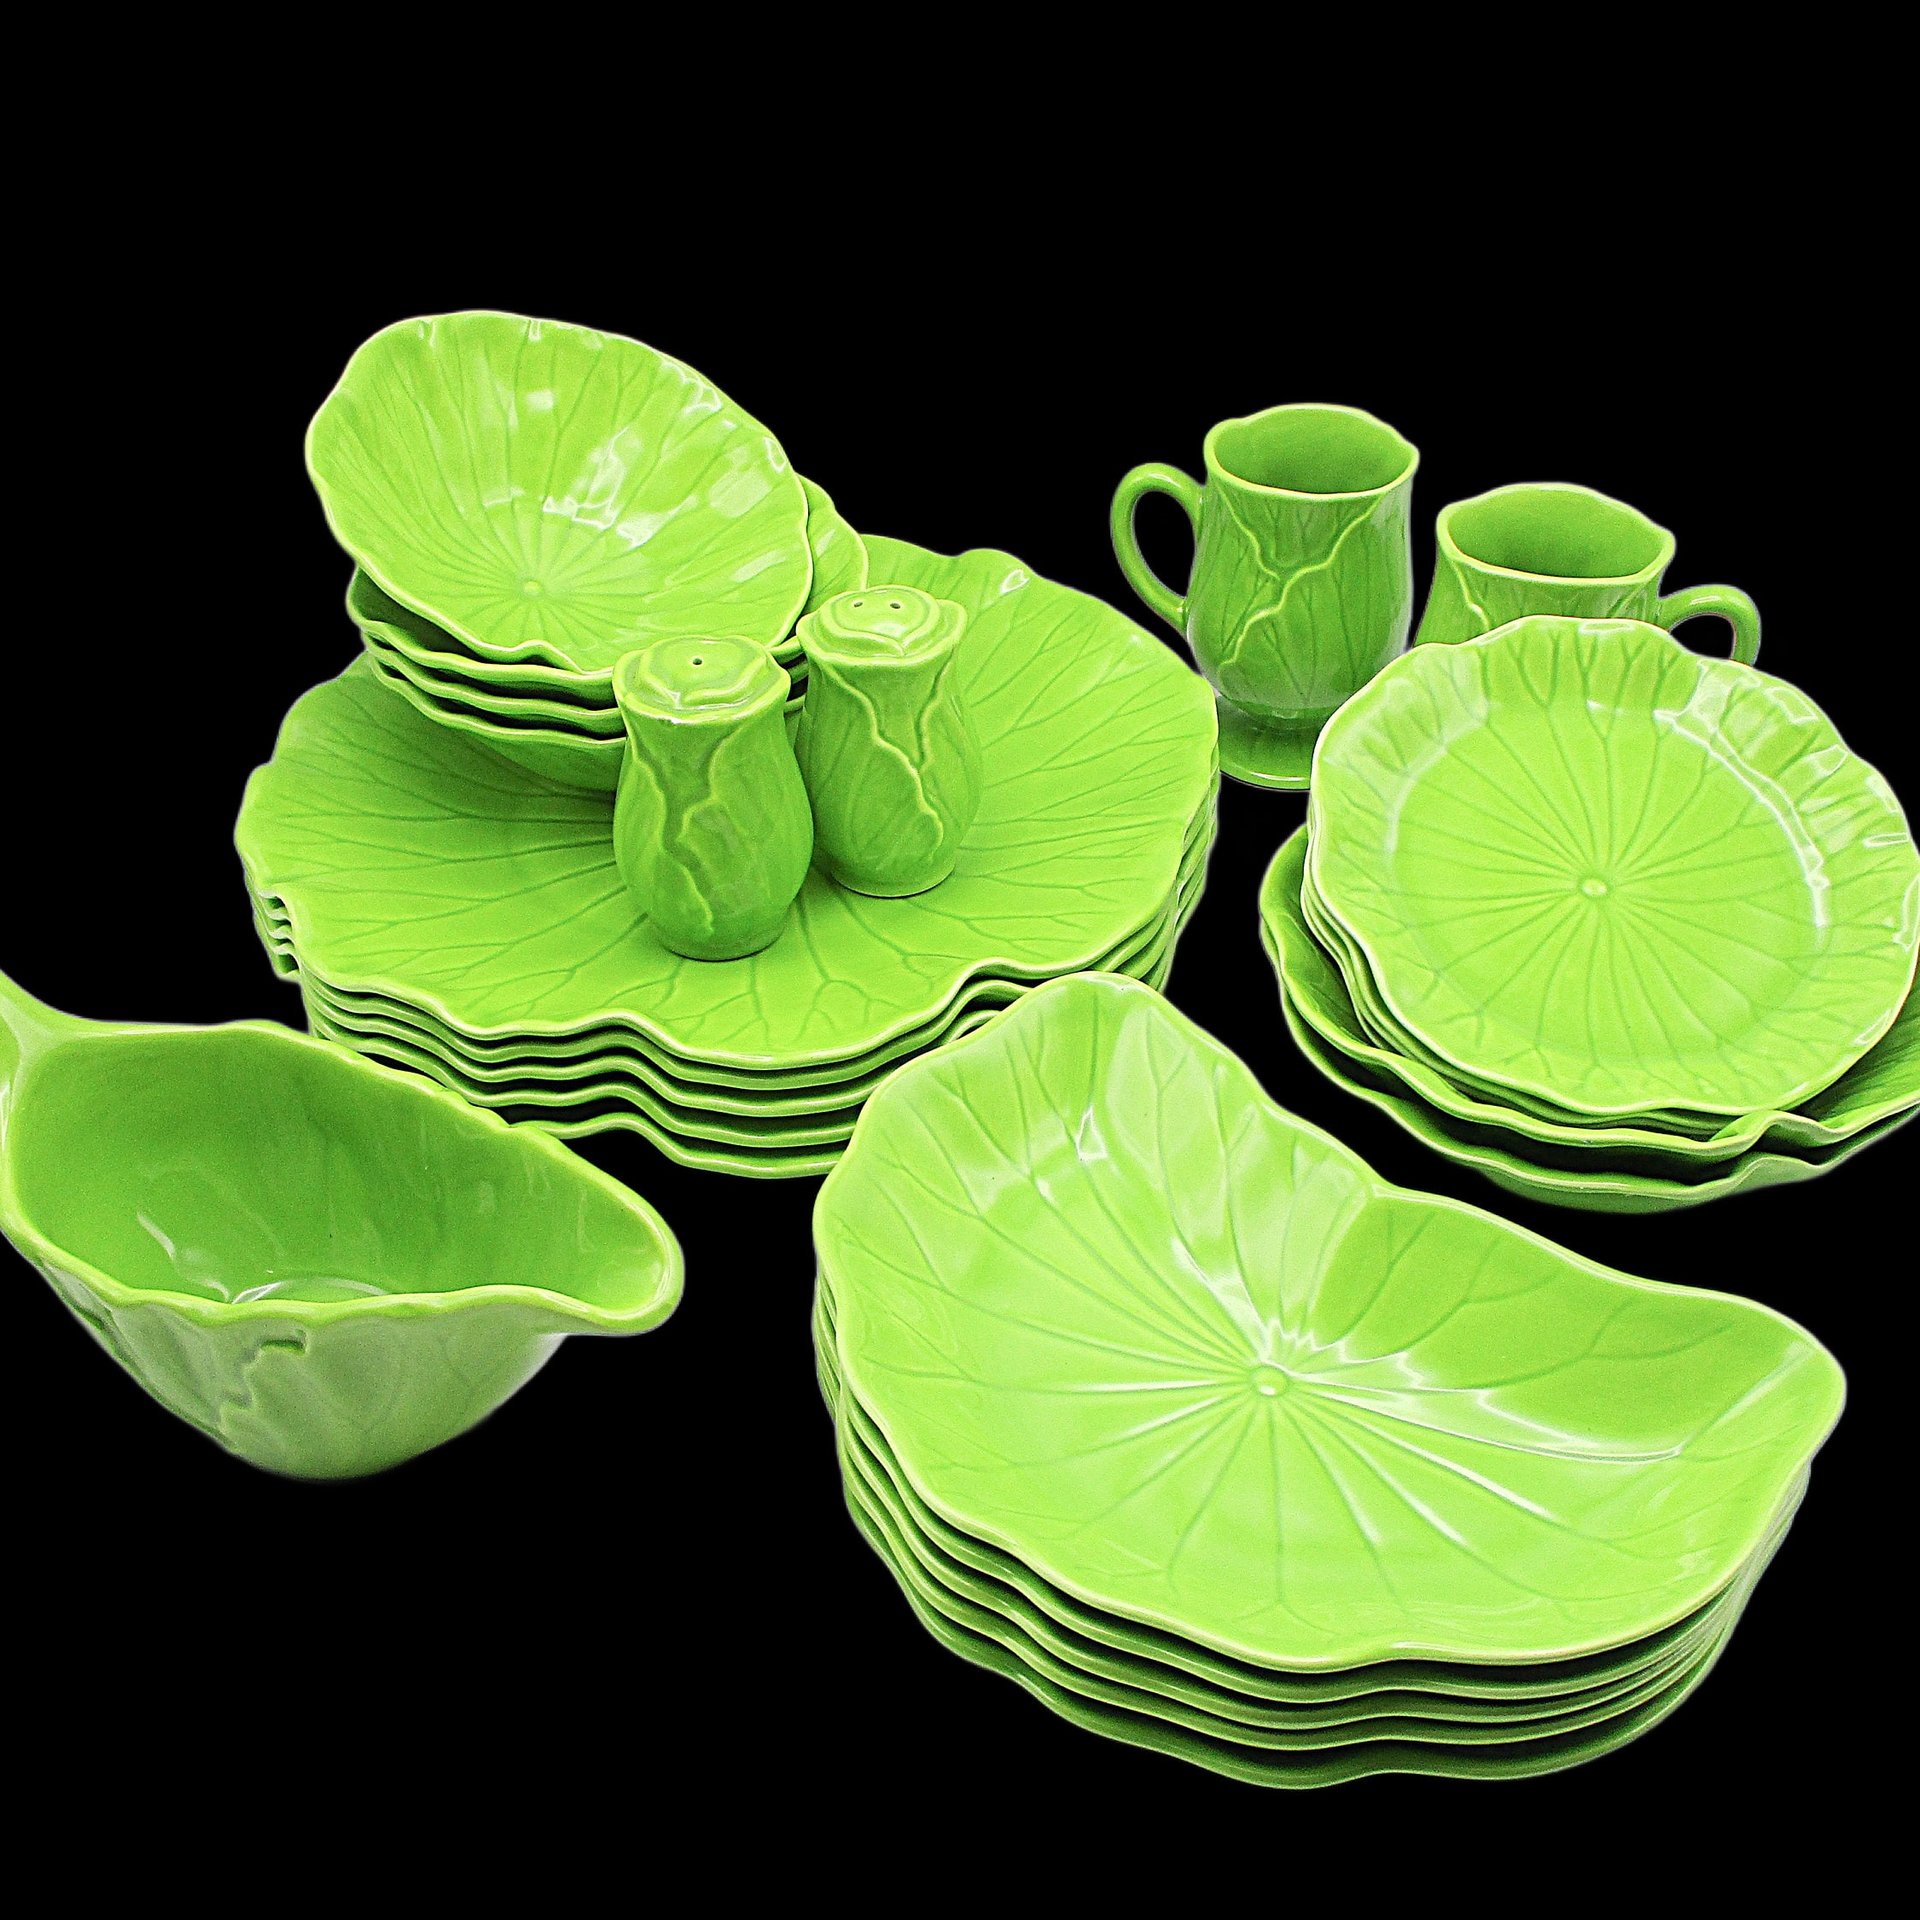 Metlox Lotus Bright Green Dinnerware, Your Choice, Crescents, Bread Salad and Dinner Plates, Cereal and Side Bowls, Salt Pepper, Gravy, Mugs